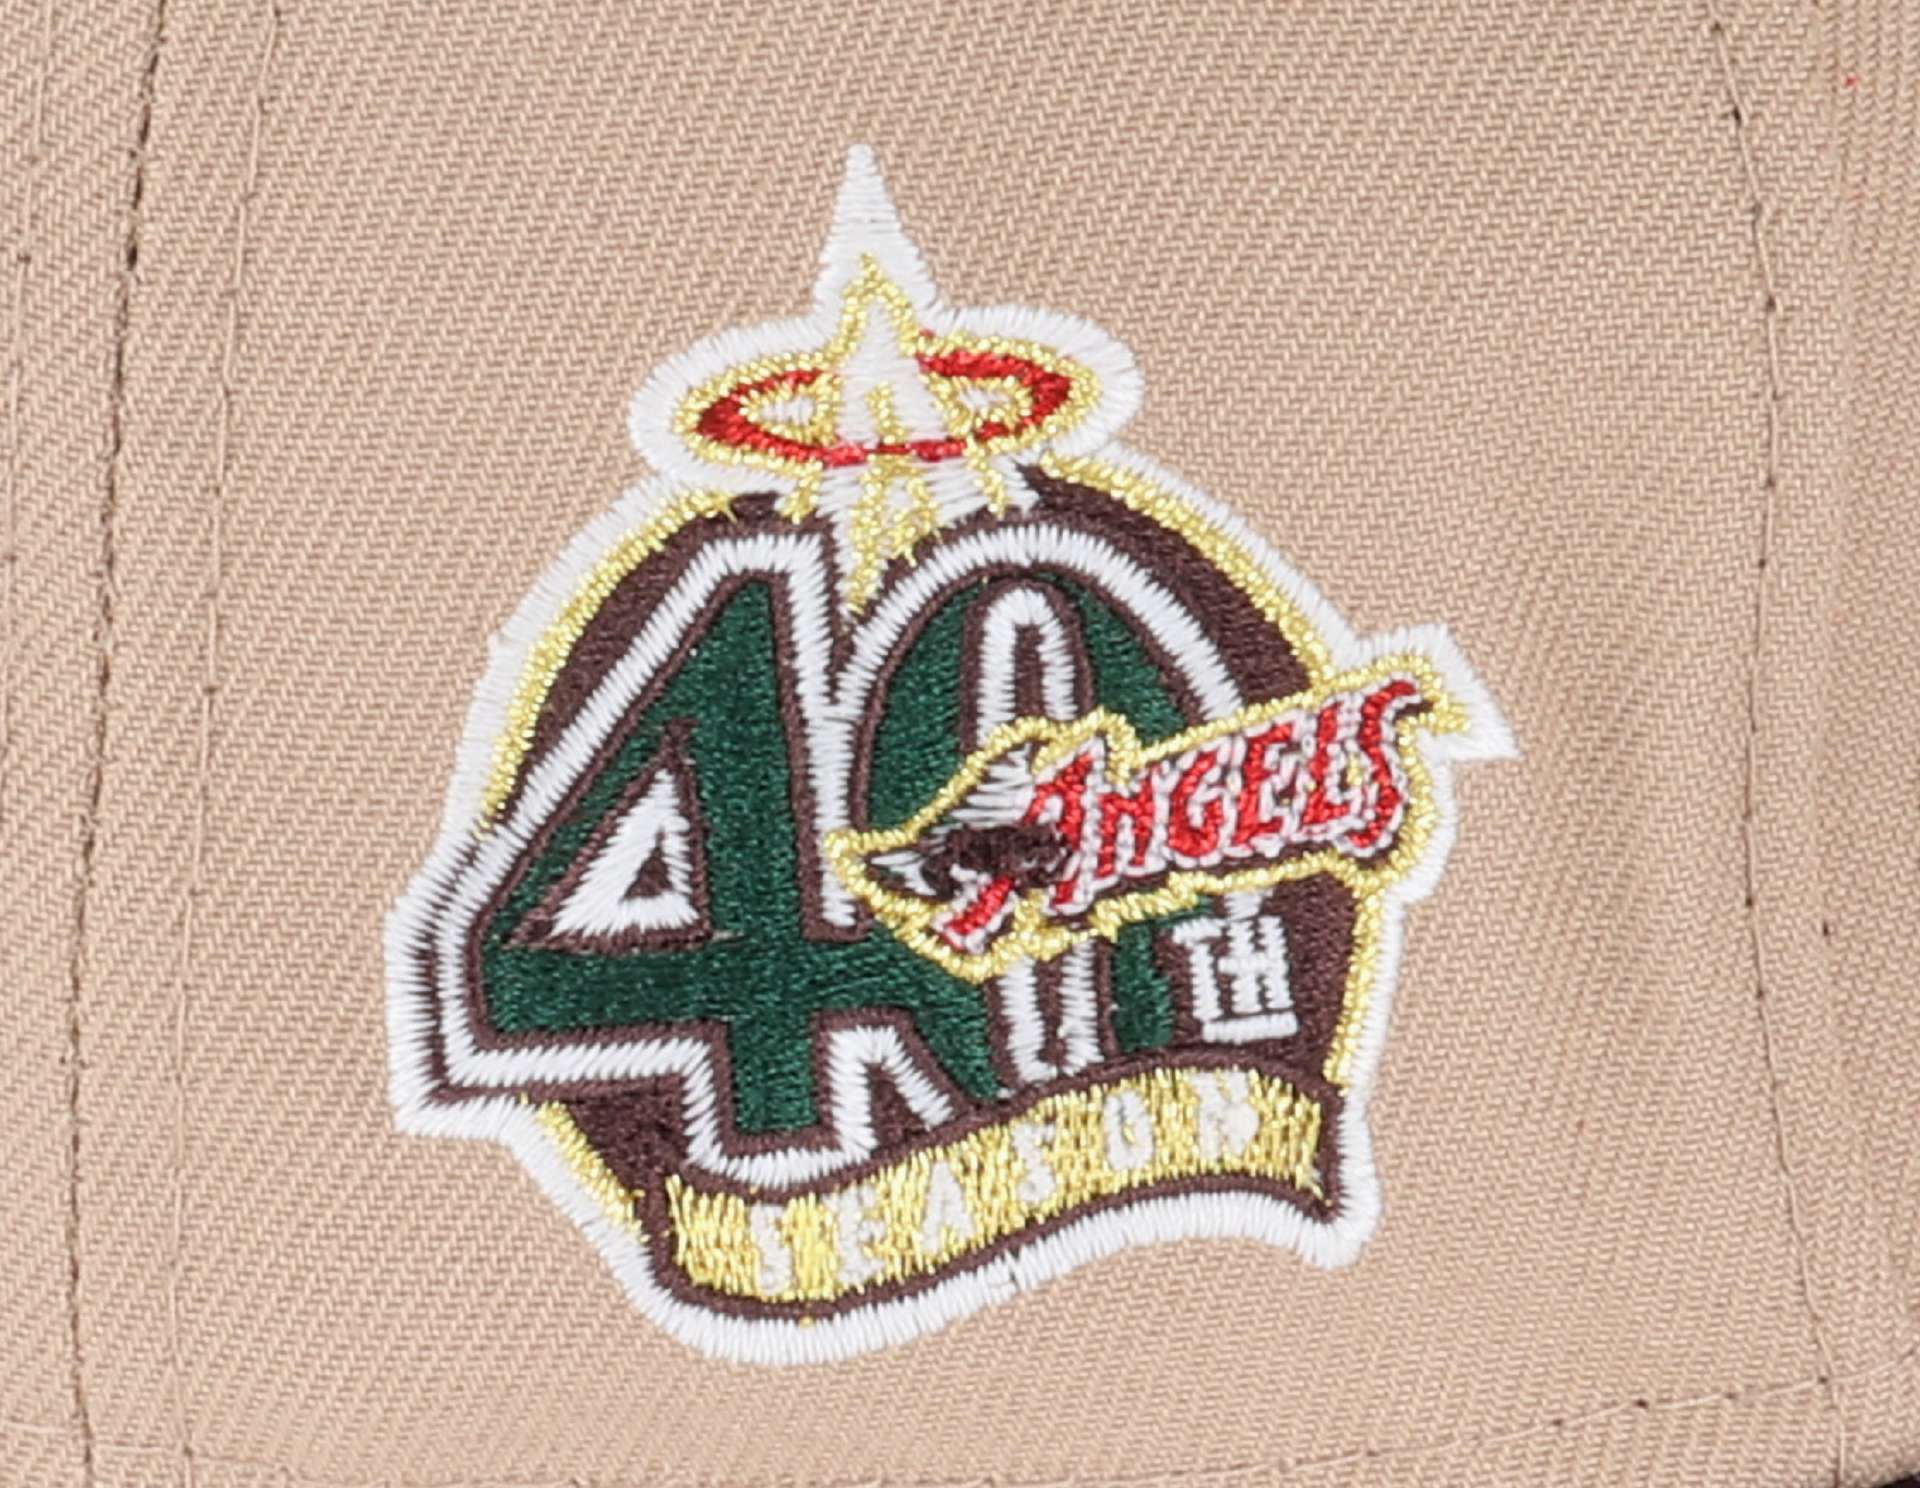 Anaheim Angels MLB Sidepatch 40th Anniversary Two-Tone Camel 59Fifty Basecap New Era